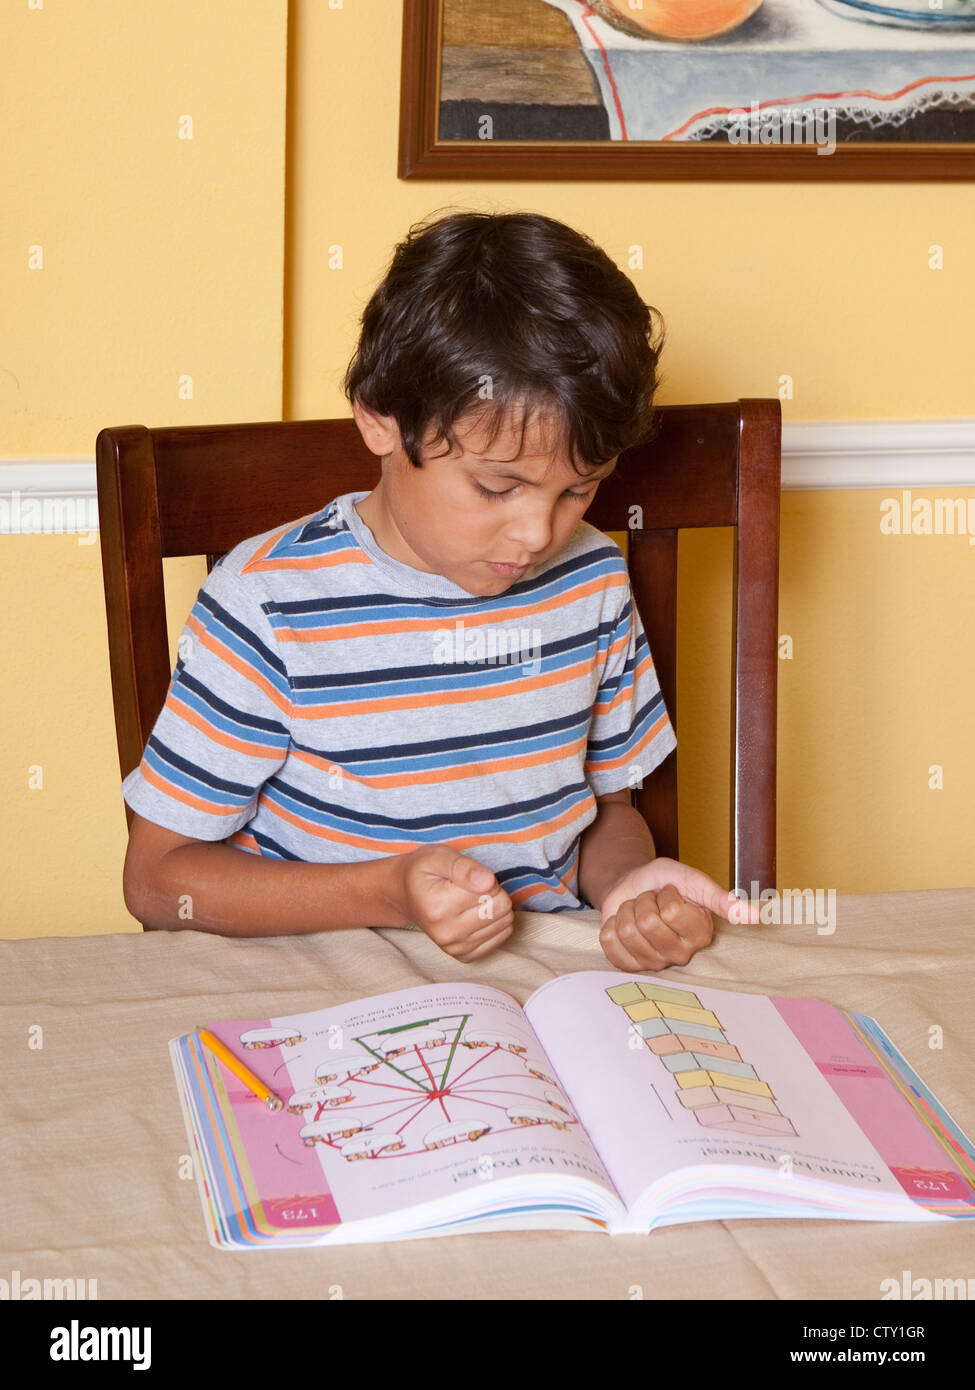 8 year old Mexican-American elementary school age boy uses fingers to help count while doing math school work while at home Stock Photo